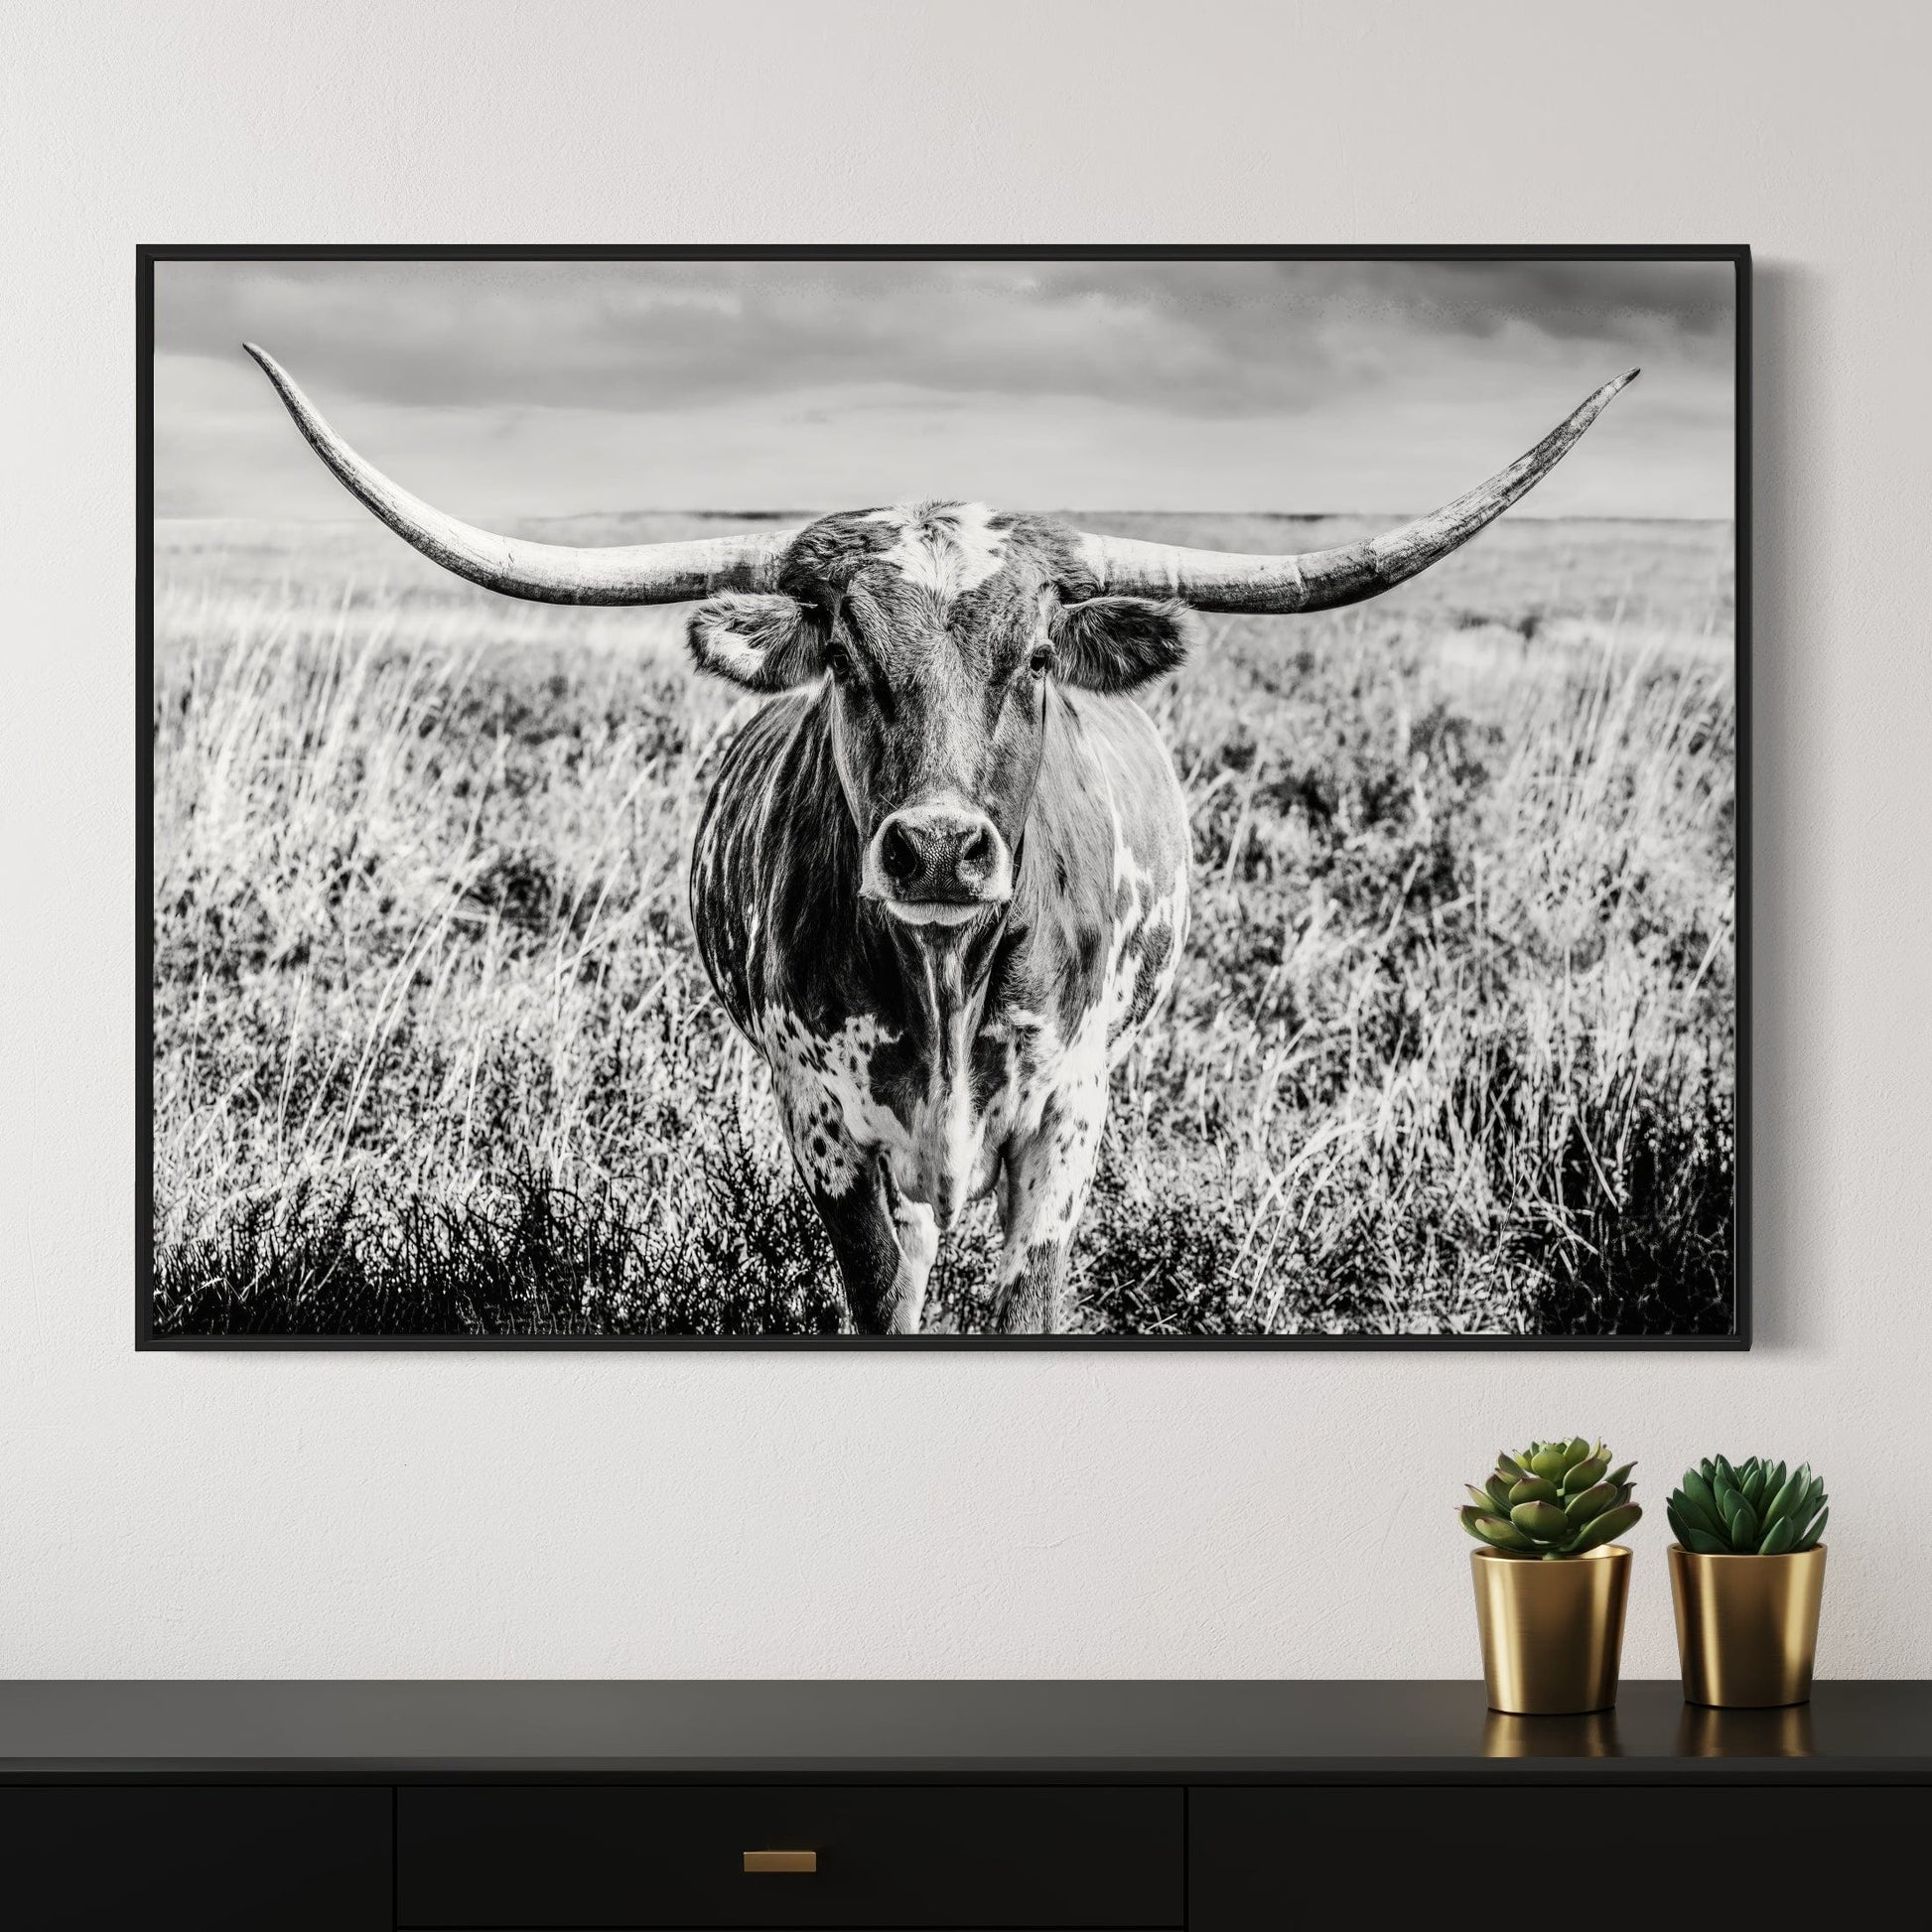 Texas Longhorn Cow Canvas Black and White Wall Art Teri James Photography